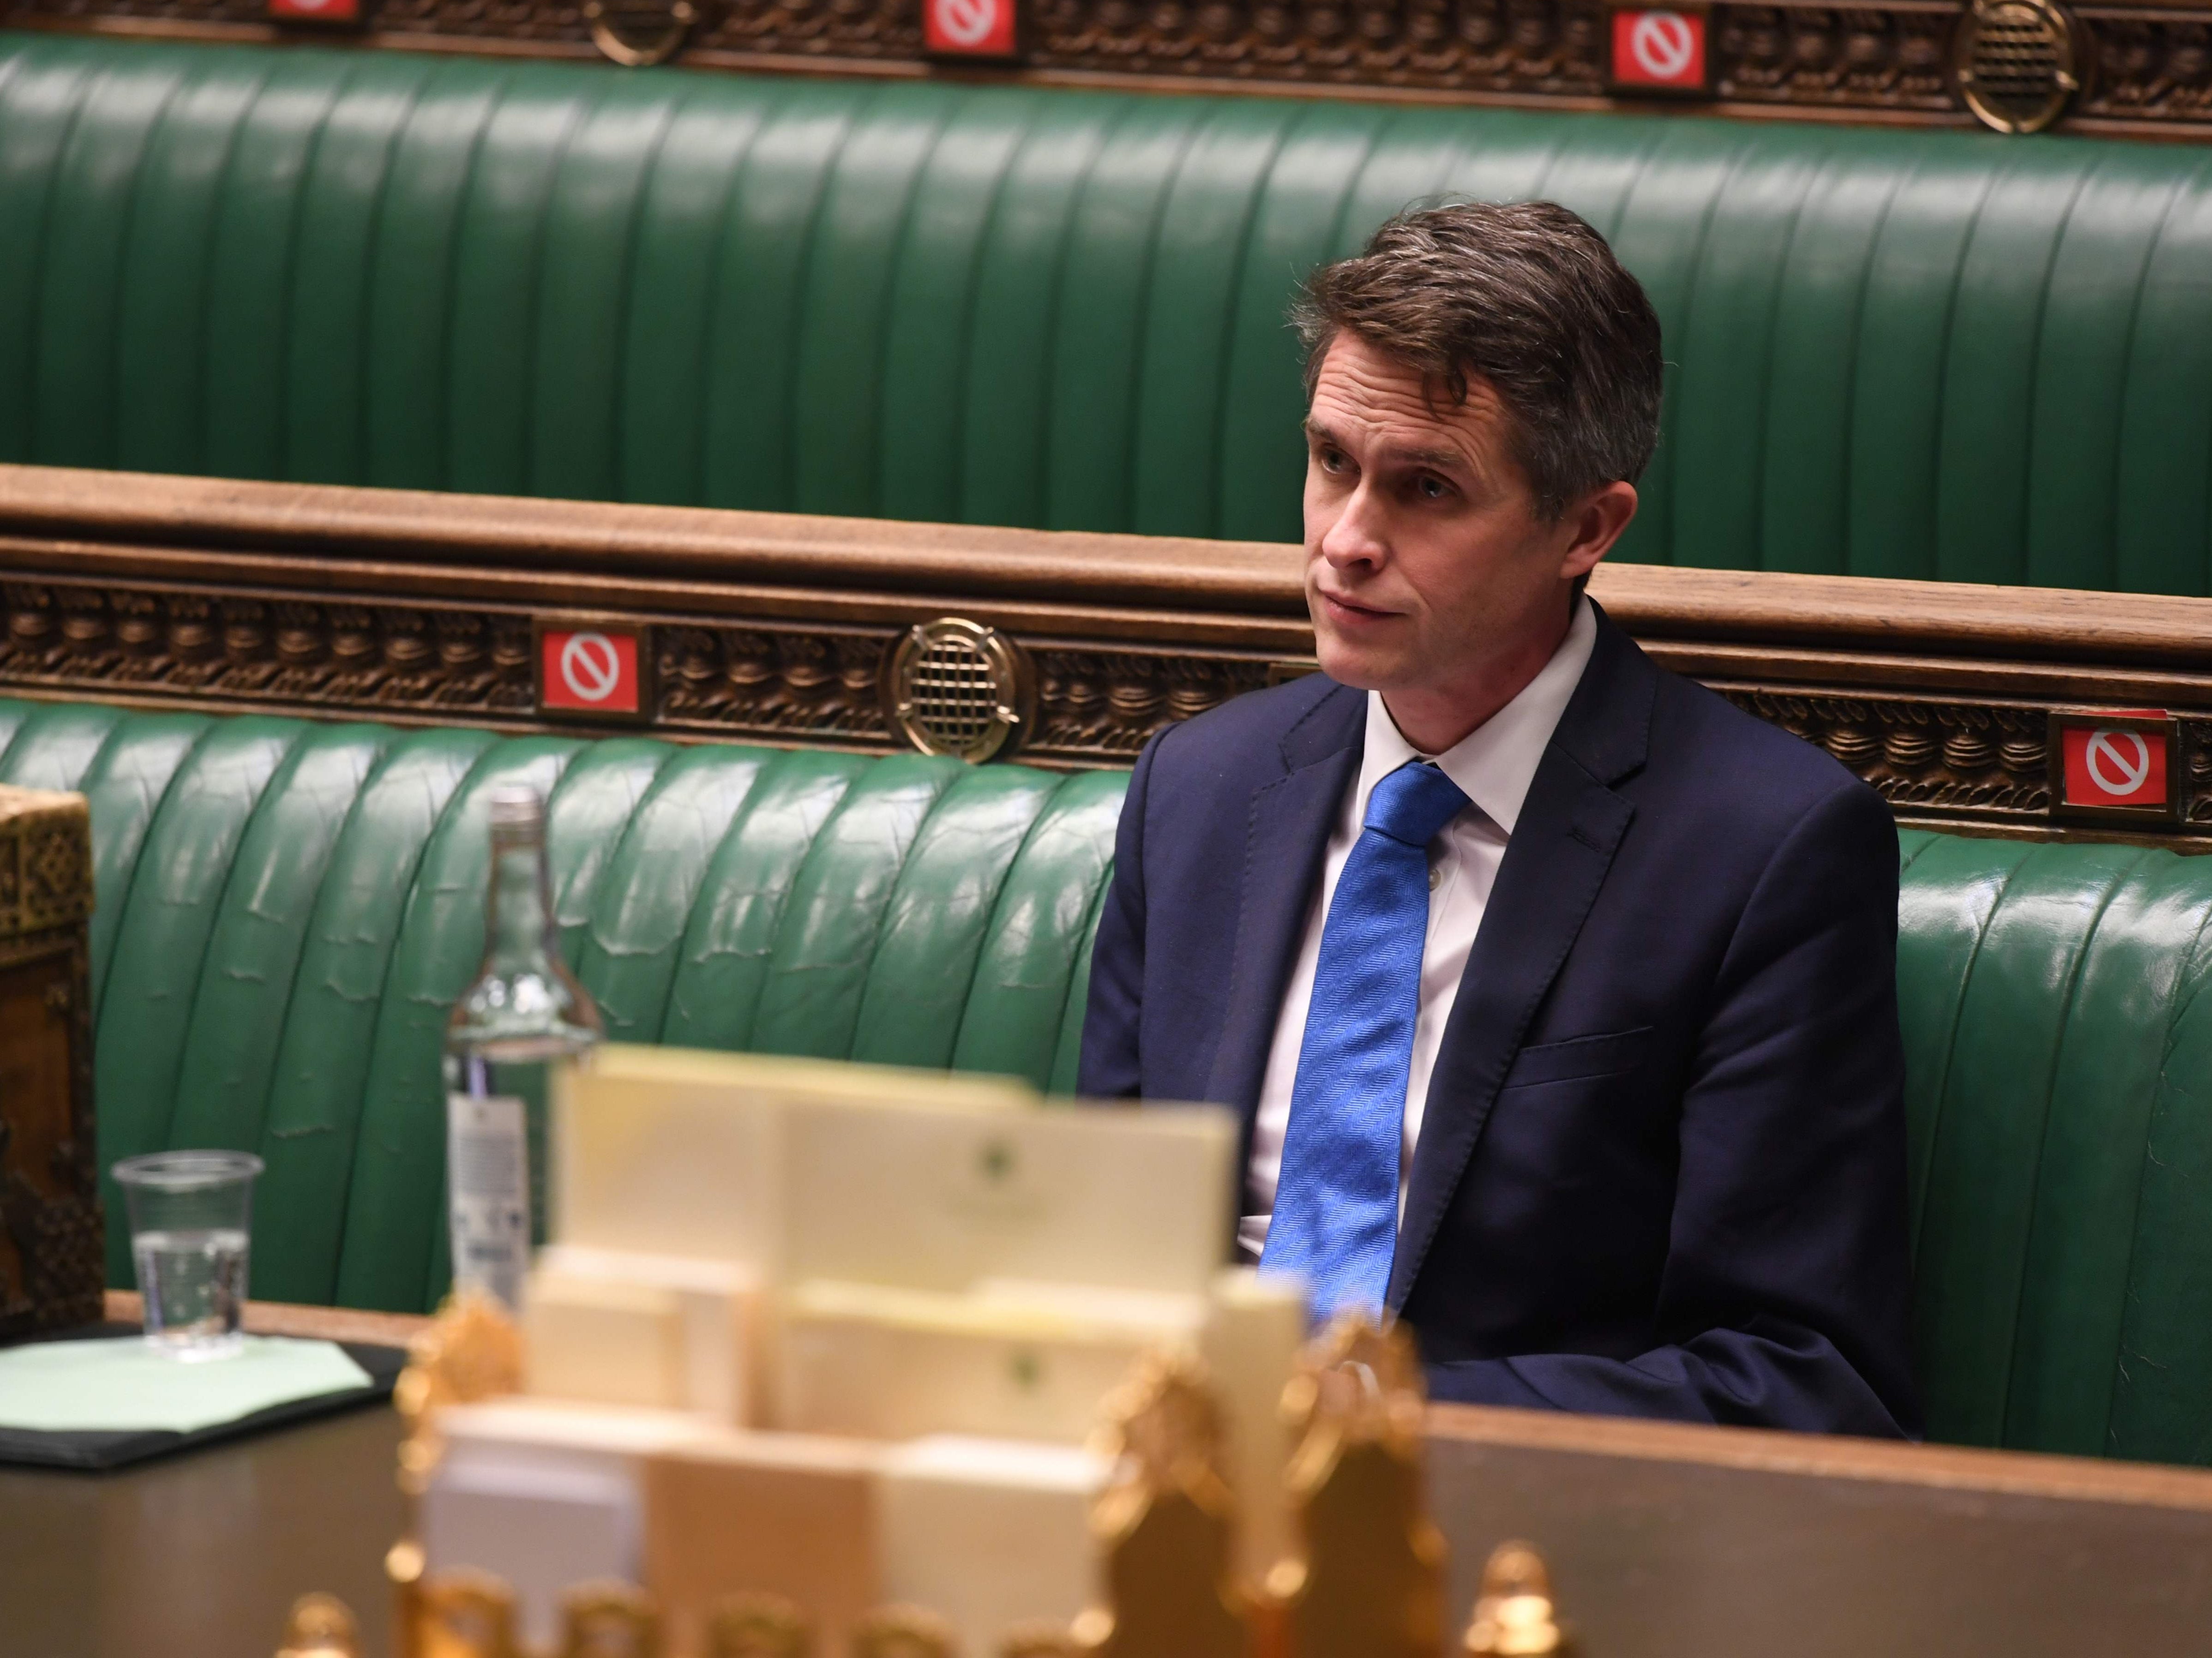 The leader of the Lib Dems has called on Gavin Williamson to resign